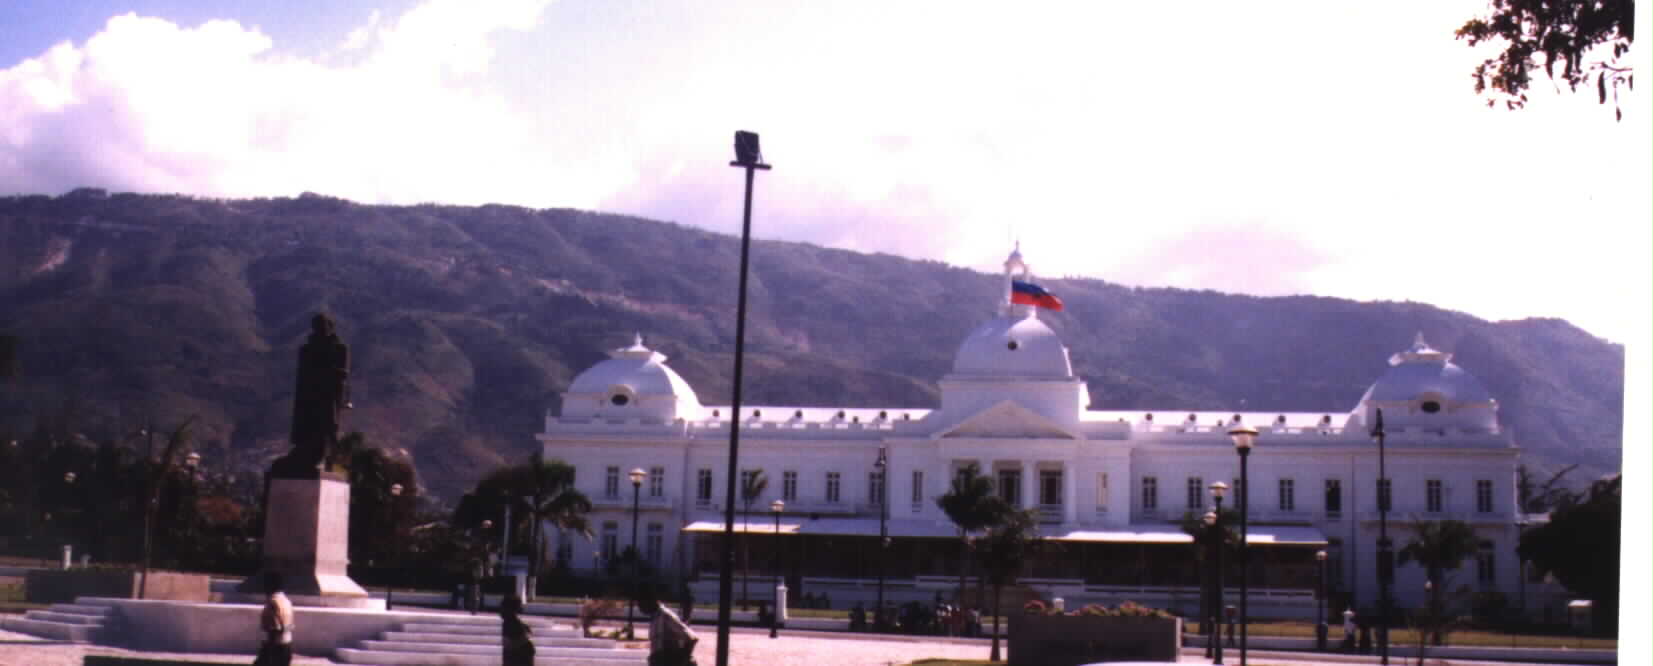 (Photographed by Noe Dorestant 1/28/2001: Haiti's national palace with the Haitian flag )Picture

photographed and provided by Noe Dorestant, if you copy for reuse, give credit where credit is due. 